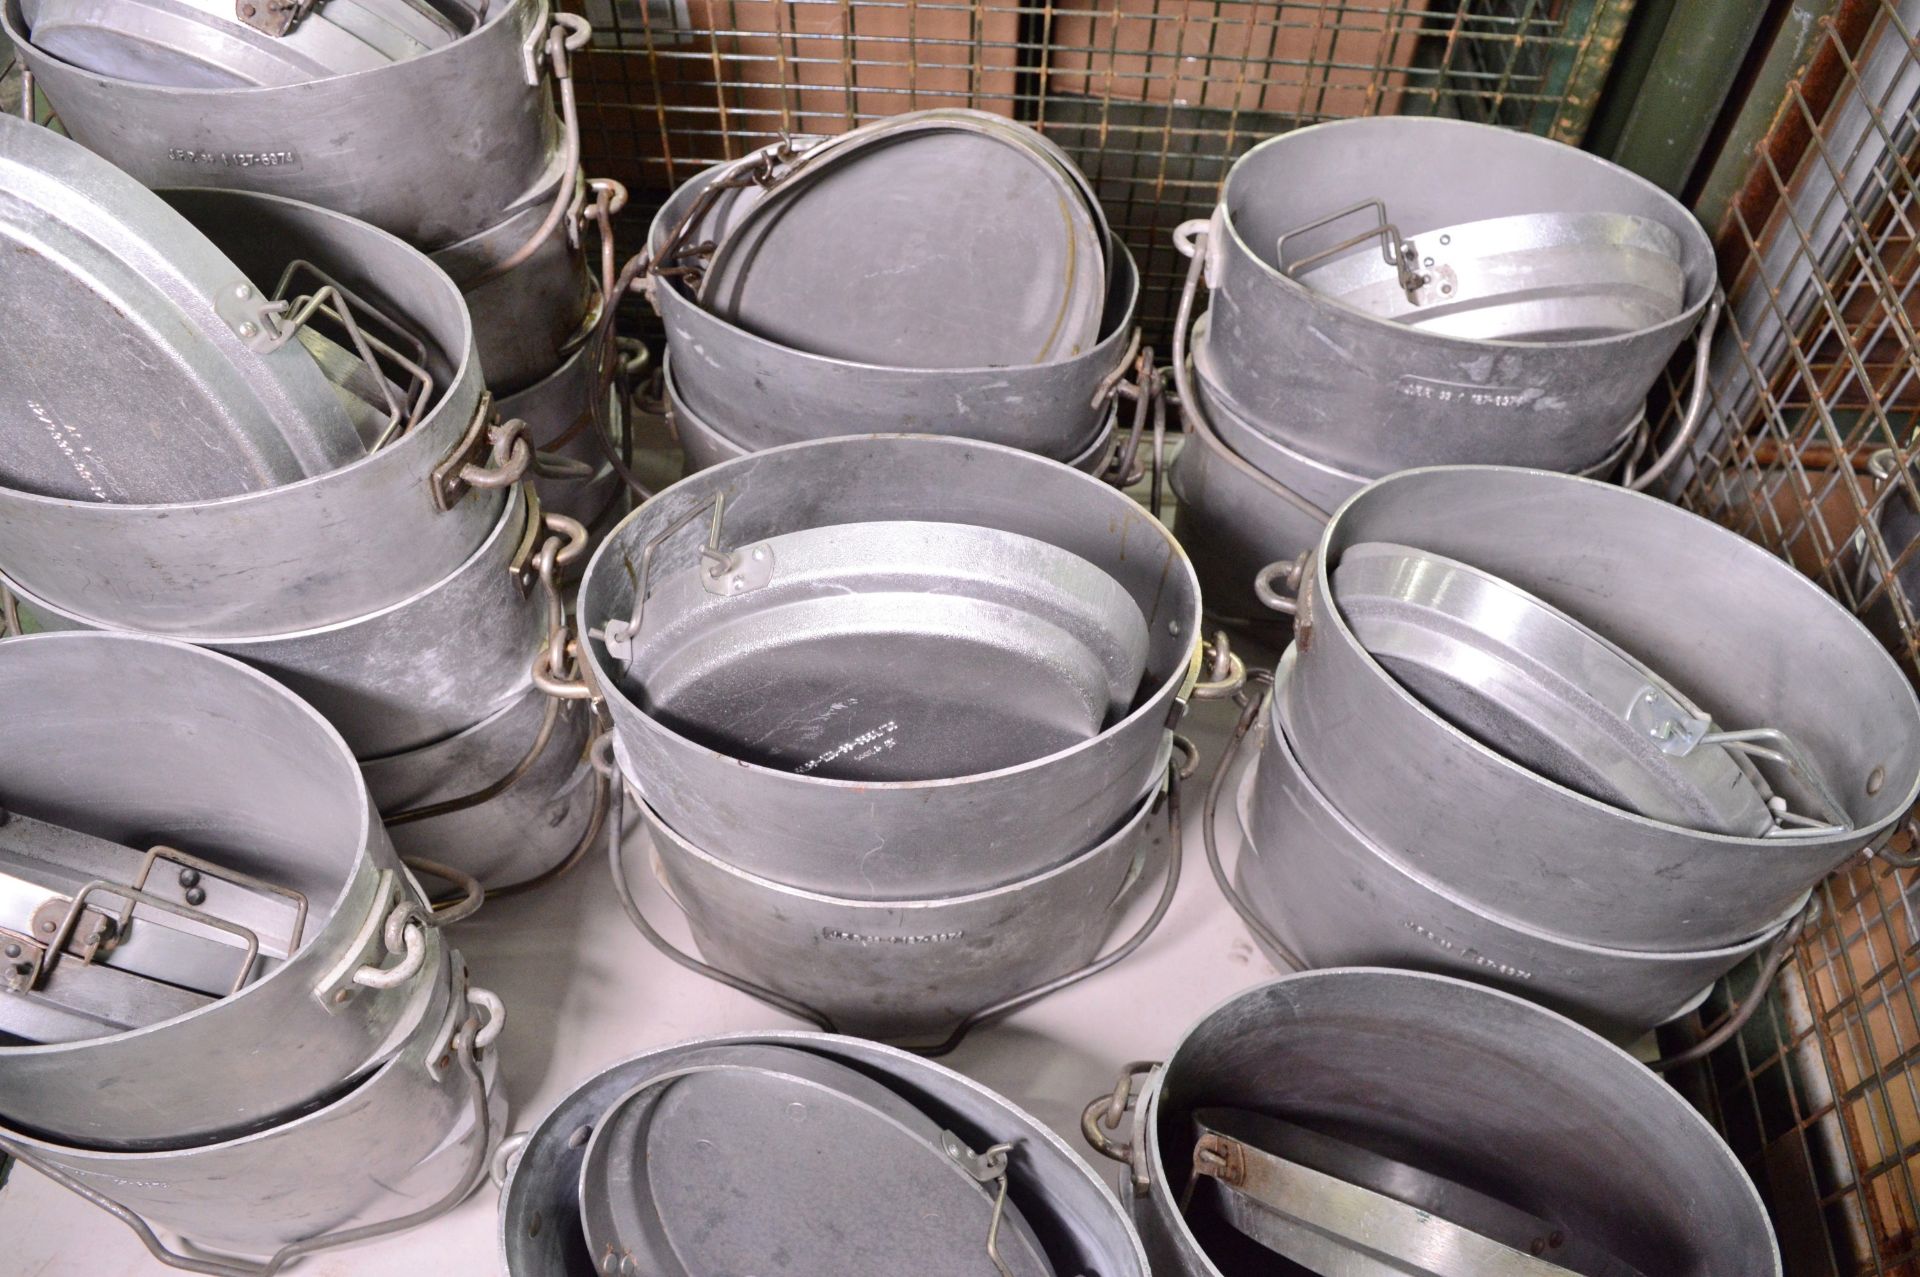 18x Aluminium Cooking Pots with Lids. - Image 2 of 2